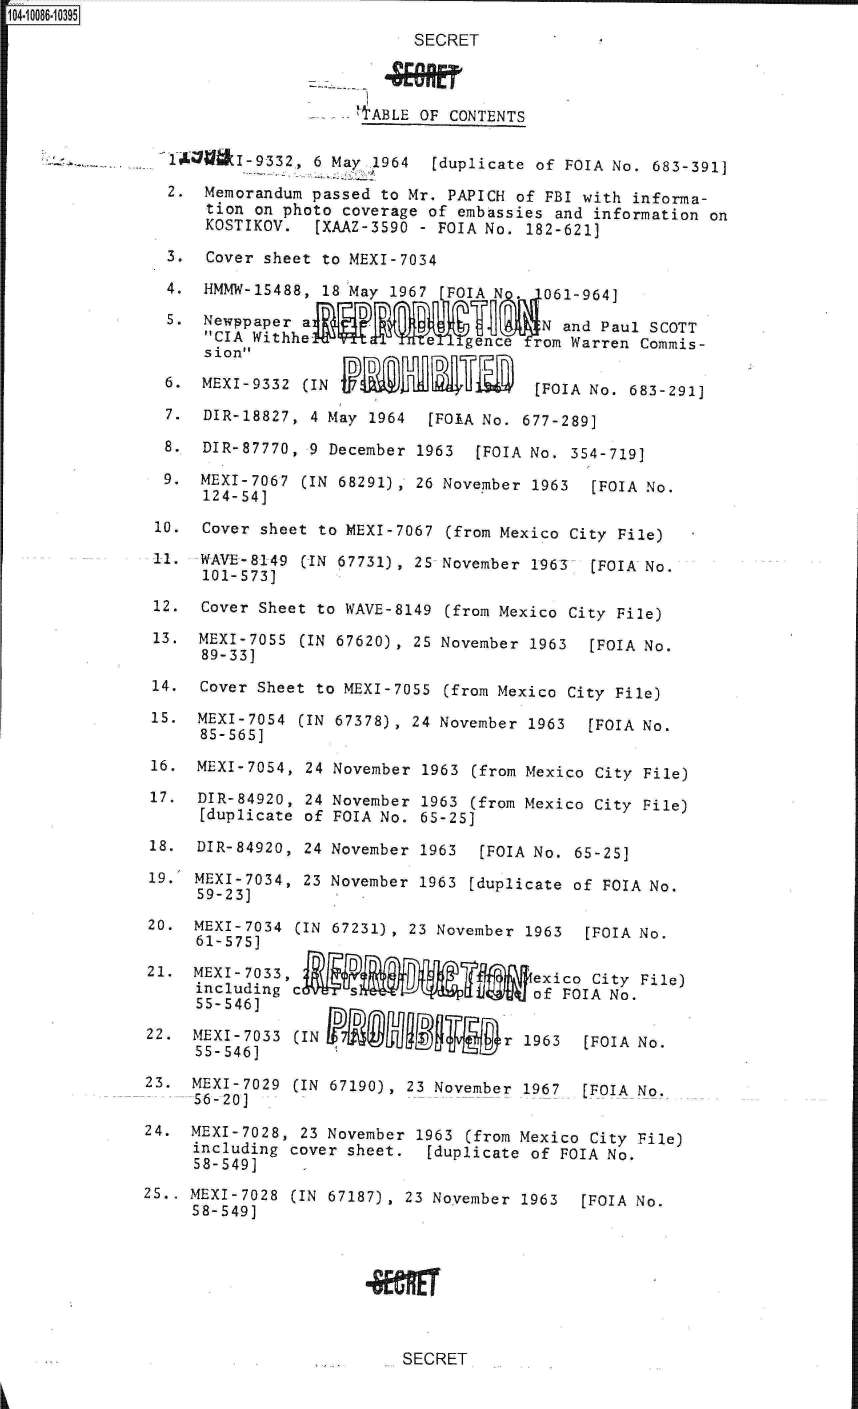 handle is hein.jfk/jfkarch09321 and id is 1 raw text is: 104-10086-10395
                                          SECRET



                                 - _!ABLE OF CONTENTS

               _1AVU&I-9332,   6 May 1964   [duplicate of FOIA No. 683-391]

               2.   Memorandum passed to Mr. PAPICH of FBI with informa-
                    tion on photo coverage of embassies and information on
                    KOSTIKOV.   [XAAZ-3590 - FOIA No. 182-621]

                3.  Cover sheet to MEXI-7034

                4.  HMMW-15488, 18 May 1967  FOIA N    061-964]

                5.  Newppaper a                        N and Paul SCOTT
                    CIA Withhe                gence  rom Warren Commis-
                    sion

                6.  MEXI-9332 (IN                     [FOIA No. 683-291]

                7.  DIR-18827, 4 May 1964  [FOIA No. 677-289]

                8.  DIR-87770, 9 December 1963  [FOIA No. 354-719]

                9.  MEXI-7067 (IN 68291), 26 November 1963  [FOIA No.
                    124-54]

               10.  Cover sheet to MEXI-7067 (from Mexico City File)

               11.  WAVE-8149 (IN 67731) , 25 November 1963 [FOIA No.
                    101-573]

               12.  Cover Sheet to WAVE-8149 (from Mexico City File)

               13.  MEXI-7055 (IN 67620), 25 November 1963  [FOIA No.
                    89-33]

               14.  Cover Sheet to MEXI-7055 (from Mexico City File)

               15. MEXI-7054  (IN 67378), 24 November 1963  [FOIA No.
                    85- 565]

               16. MEXI-7054,  24 November 1963 (from Mexico City File)

               17. DIR-84920, 24 November 1963 (from Mexico City File)
                    [duplicate of FOIA No. 65-25]

               18. DIR-84920, 24 November 1963  [FOIA No. 65-25]

               19.' MEXI-7034, 23 November 1963 [duplicate of FOIA No.
                   59-23]

              20.  MEXI-7034 (IN 67231), 23 November 1963  [FOIA No.
                   61-575]

              21.  MEXI-7033 (                       1963
                   including  i     a    tl           ofFIN.
                   55-546]

              22.  MEX I -7 0 33 (  ~a~     go     r16      F     o

              23.  MEXI-7029 (IN 67190), 23 November 1967  [FOIA No,
                   5 6- 20]
              24.  MEXI-7028, 23 November 1963 (from Mexico City File)
                   including cover sheet.  [duplicate of FOIA No.
                   58-549]
              25,. MEXI-7028 (IN 67187), 23 November 1963  [FOIA No.
                   5 8-549]


SECRET


